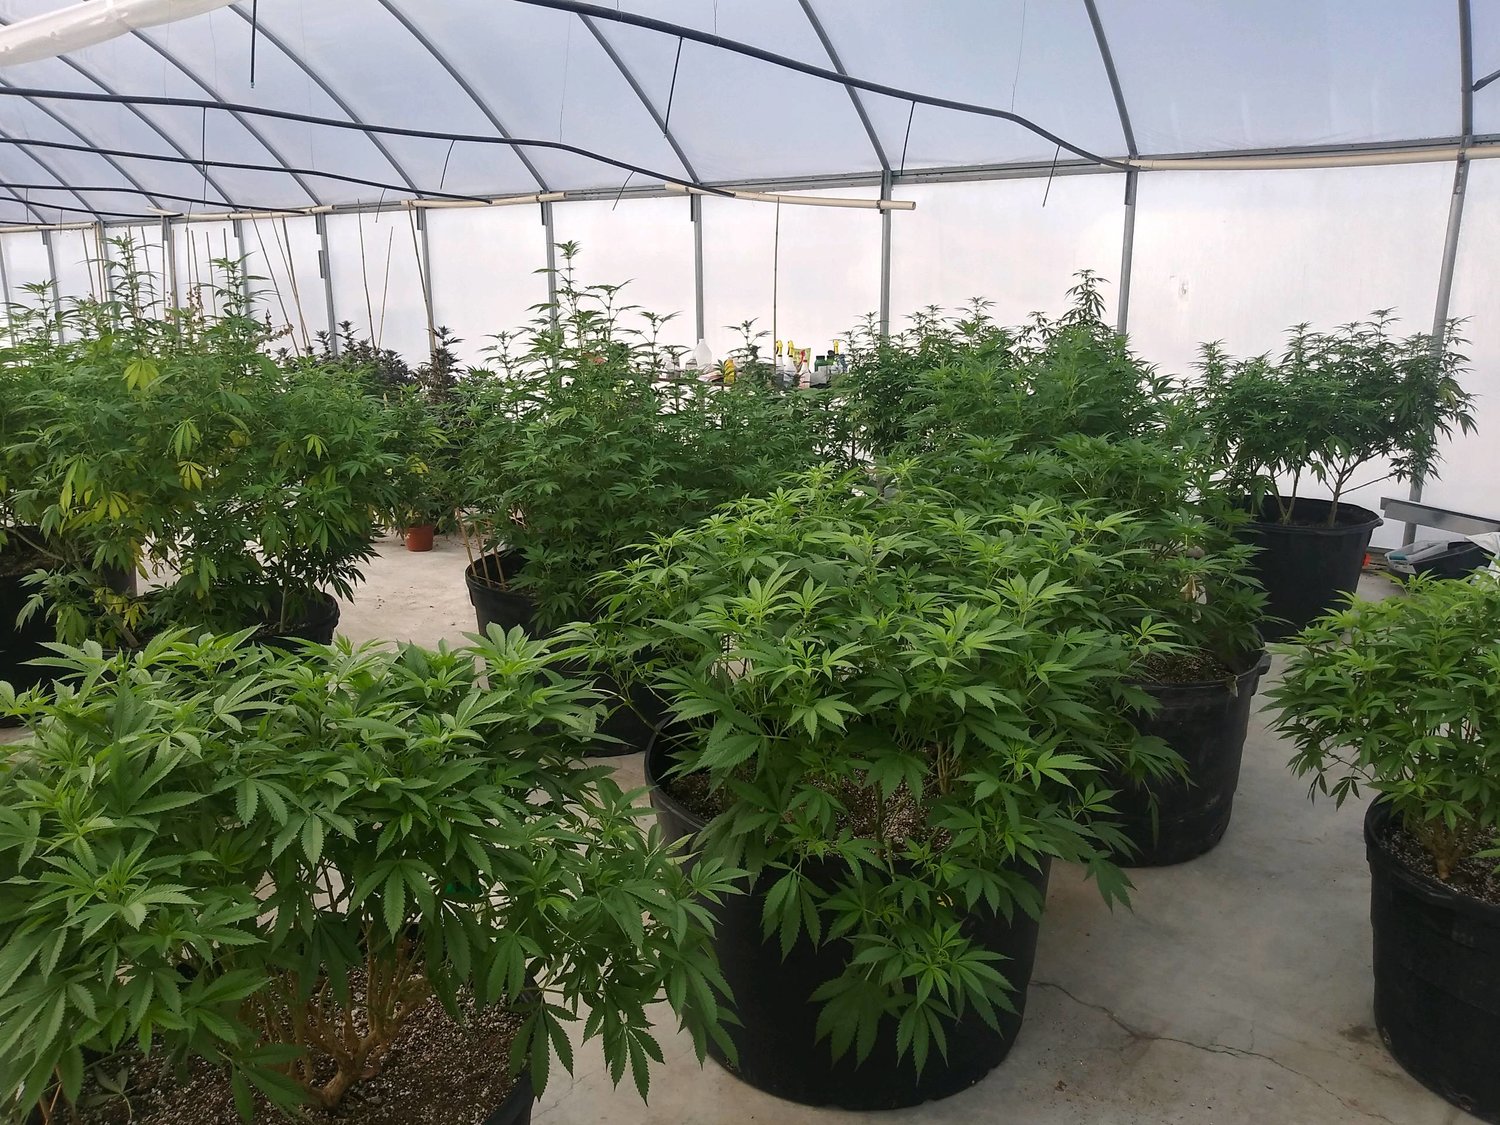 Cannabis plants being grown by Akeso Botanicals, LLC, are in greenhouses on Las Cruces’ West Mesa.